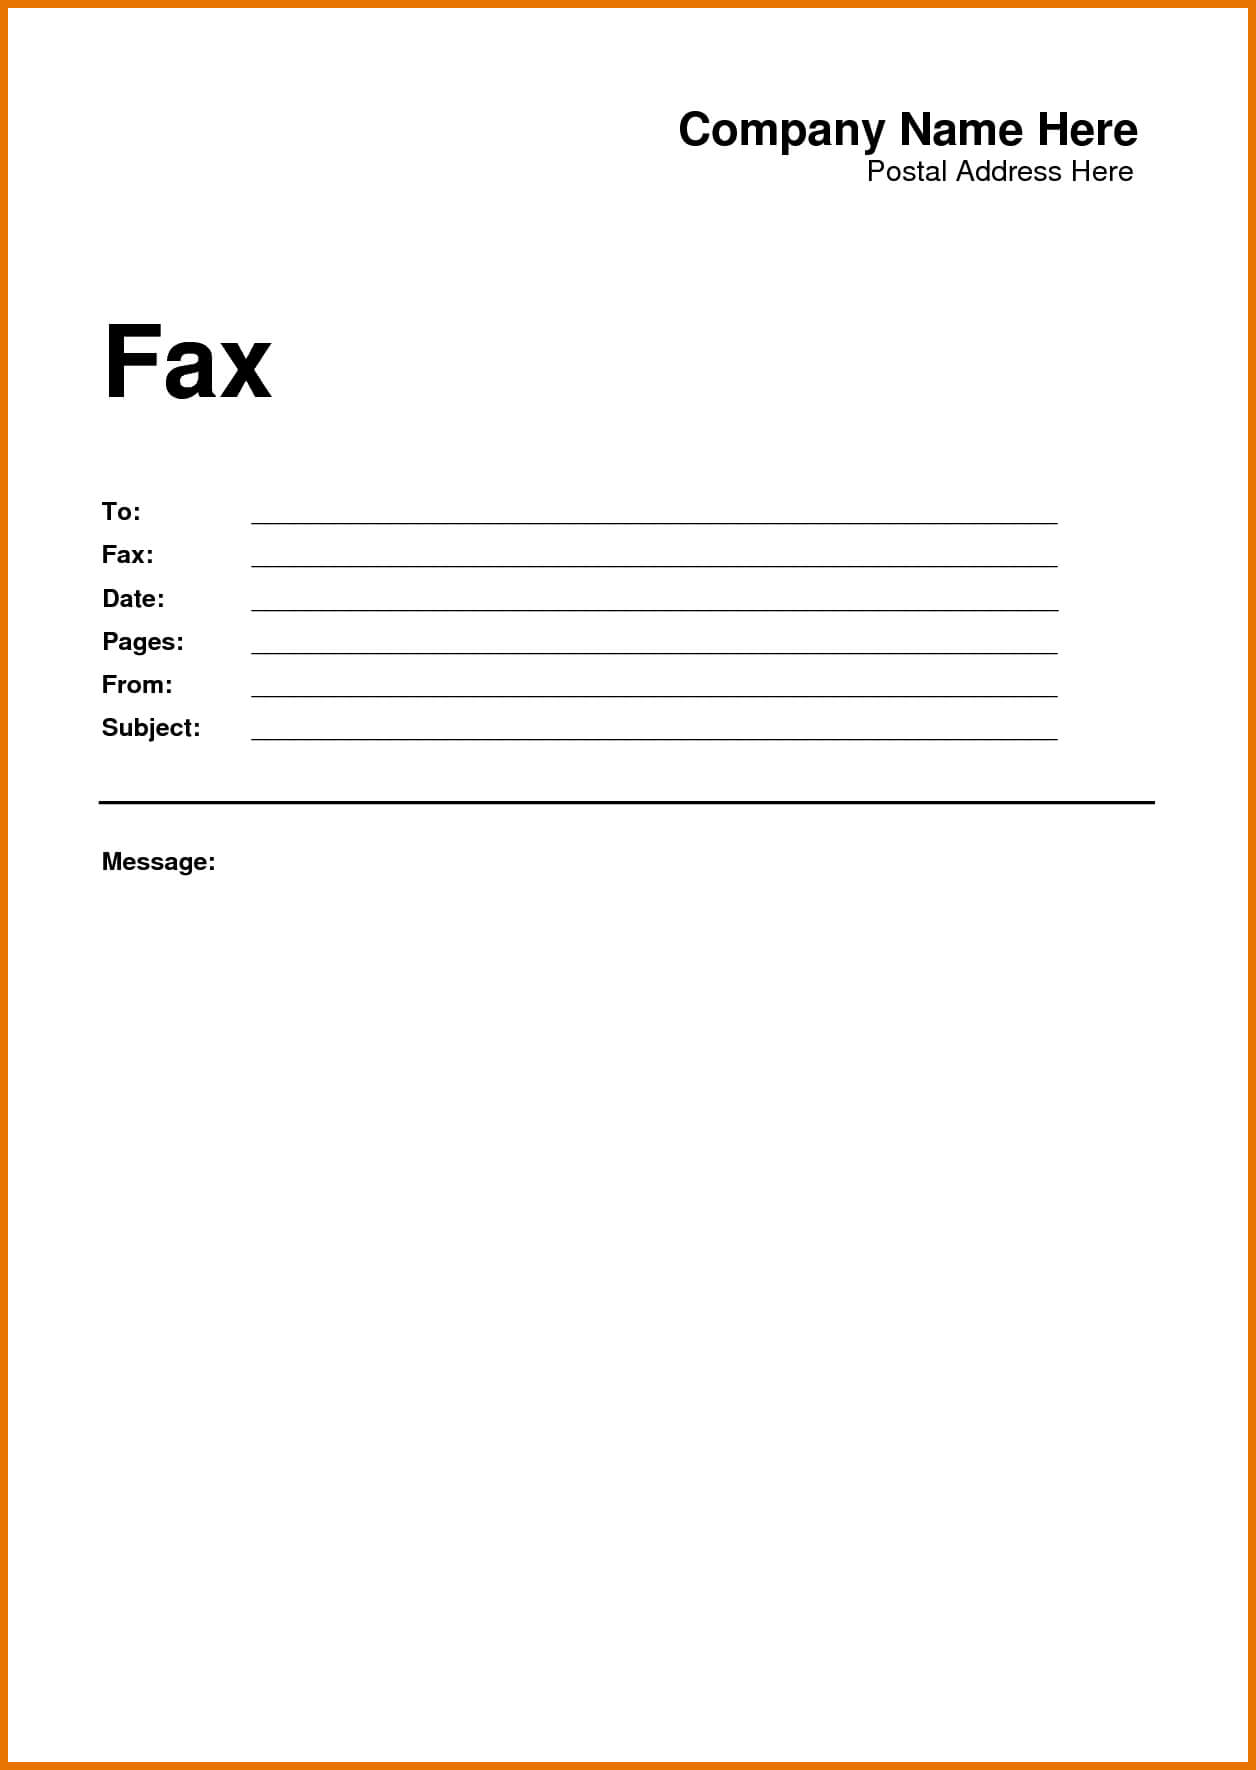 Fax Cover Letter Word Cover Letter Template Word Test Fax In Fax Cover Sheet Template Word 2010